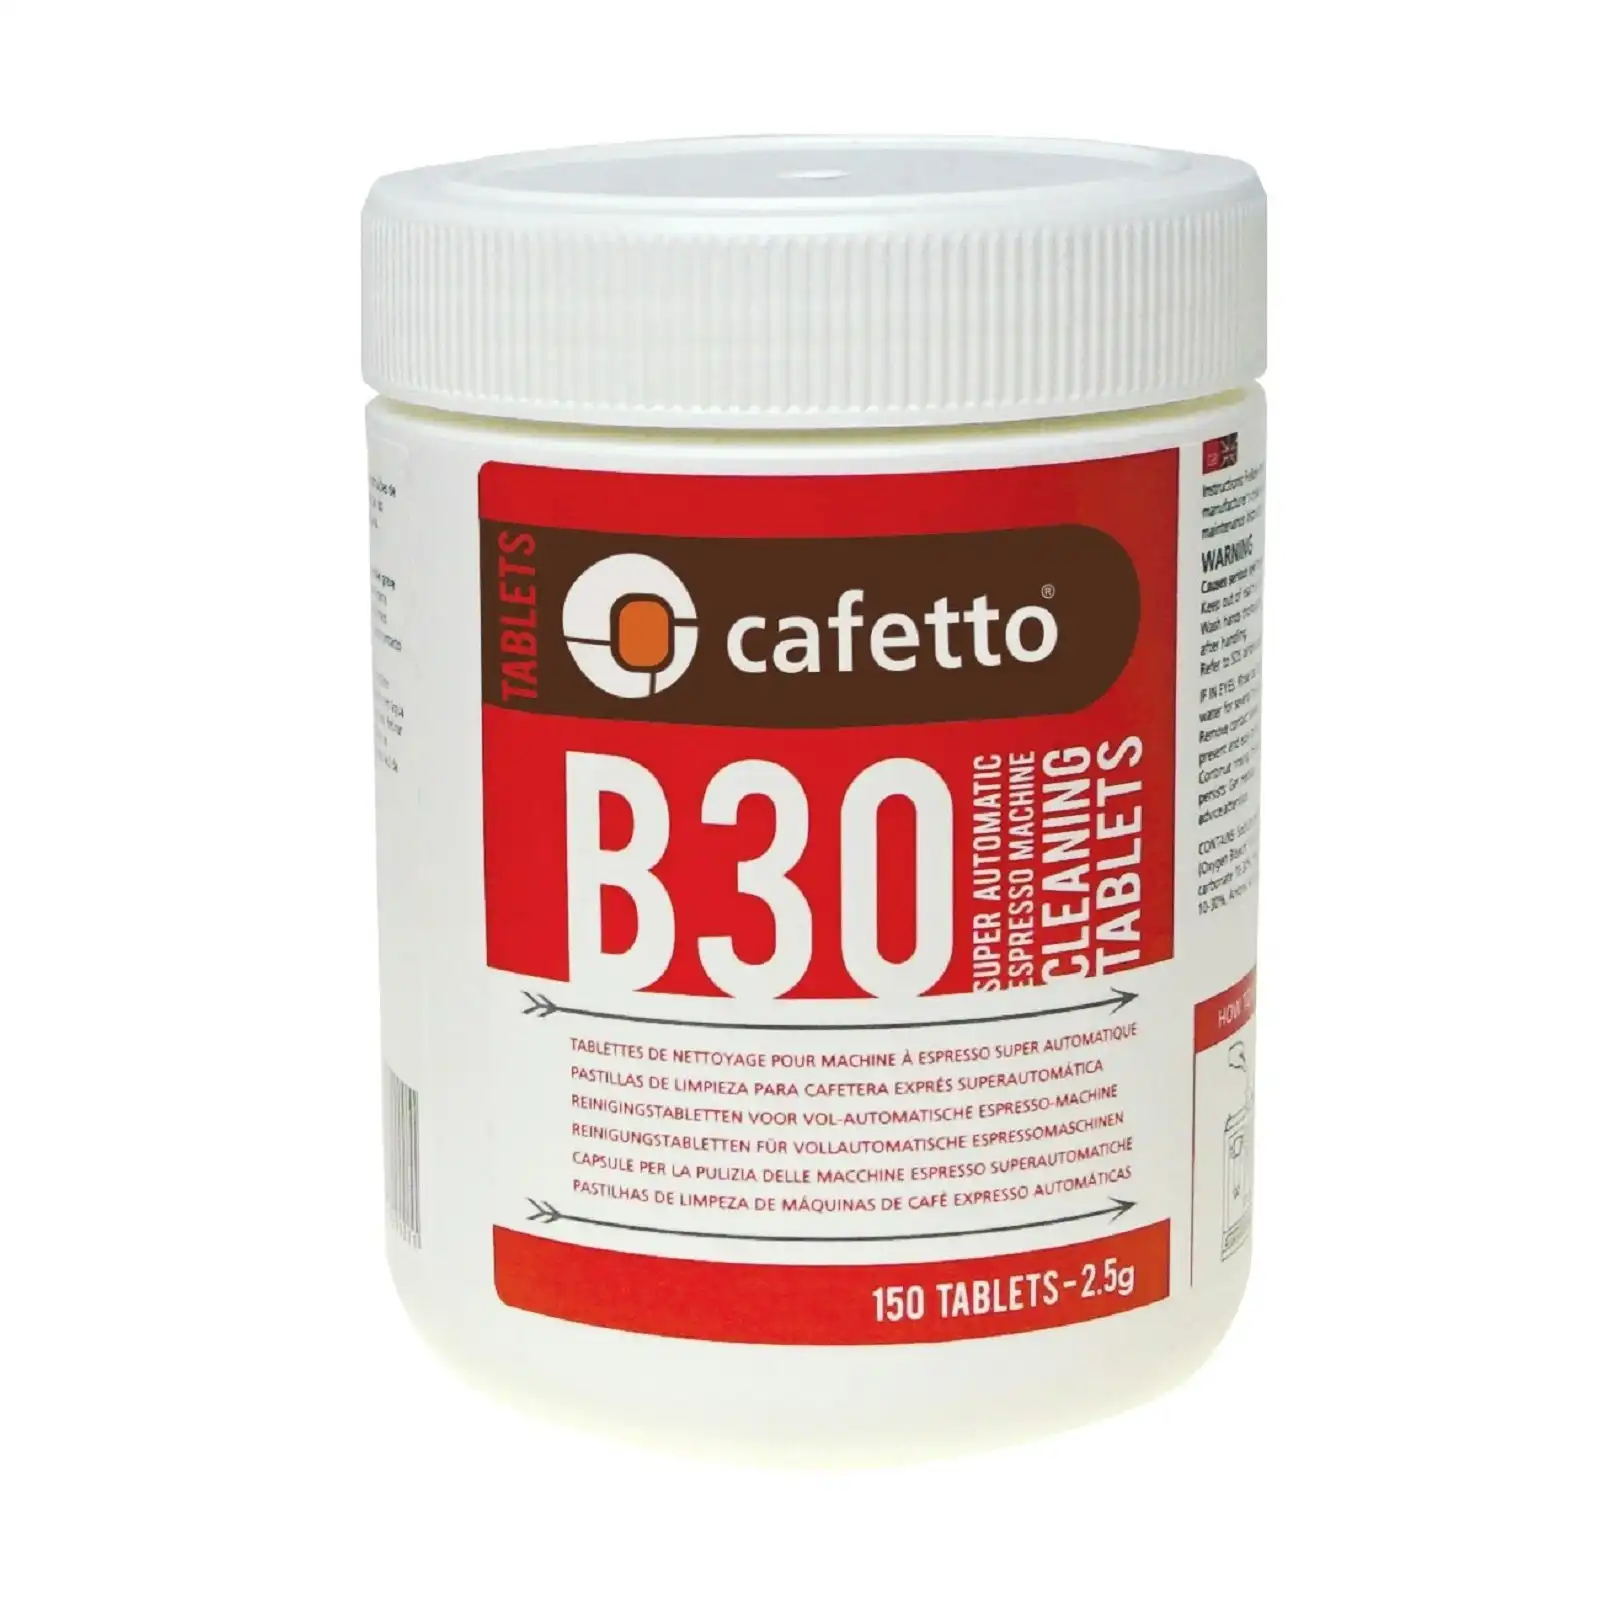 Cafetto B30 Super Automatic Espresso Machine Cleaning Tablets   150 Tablets